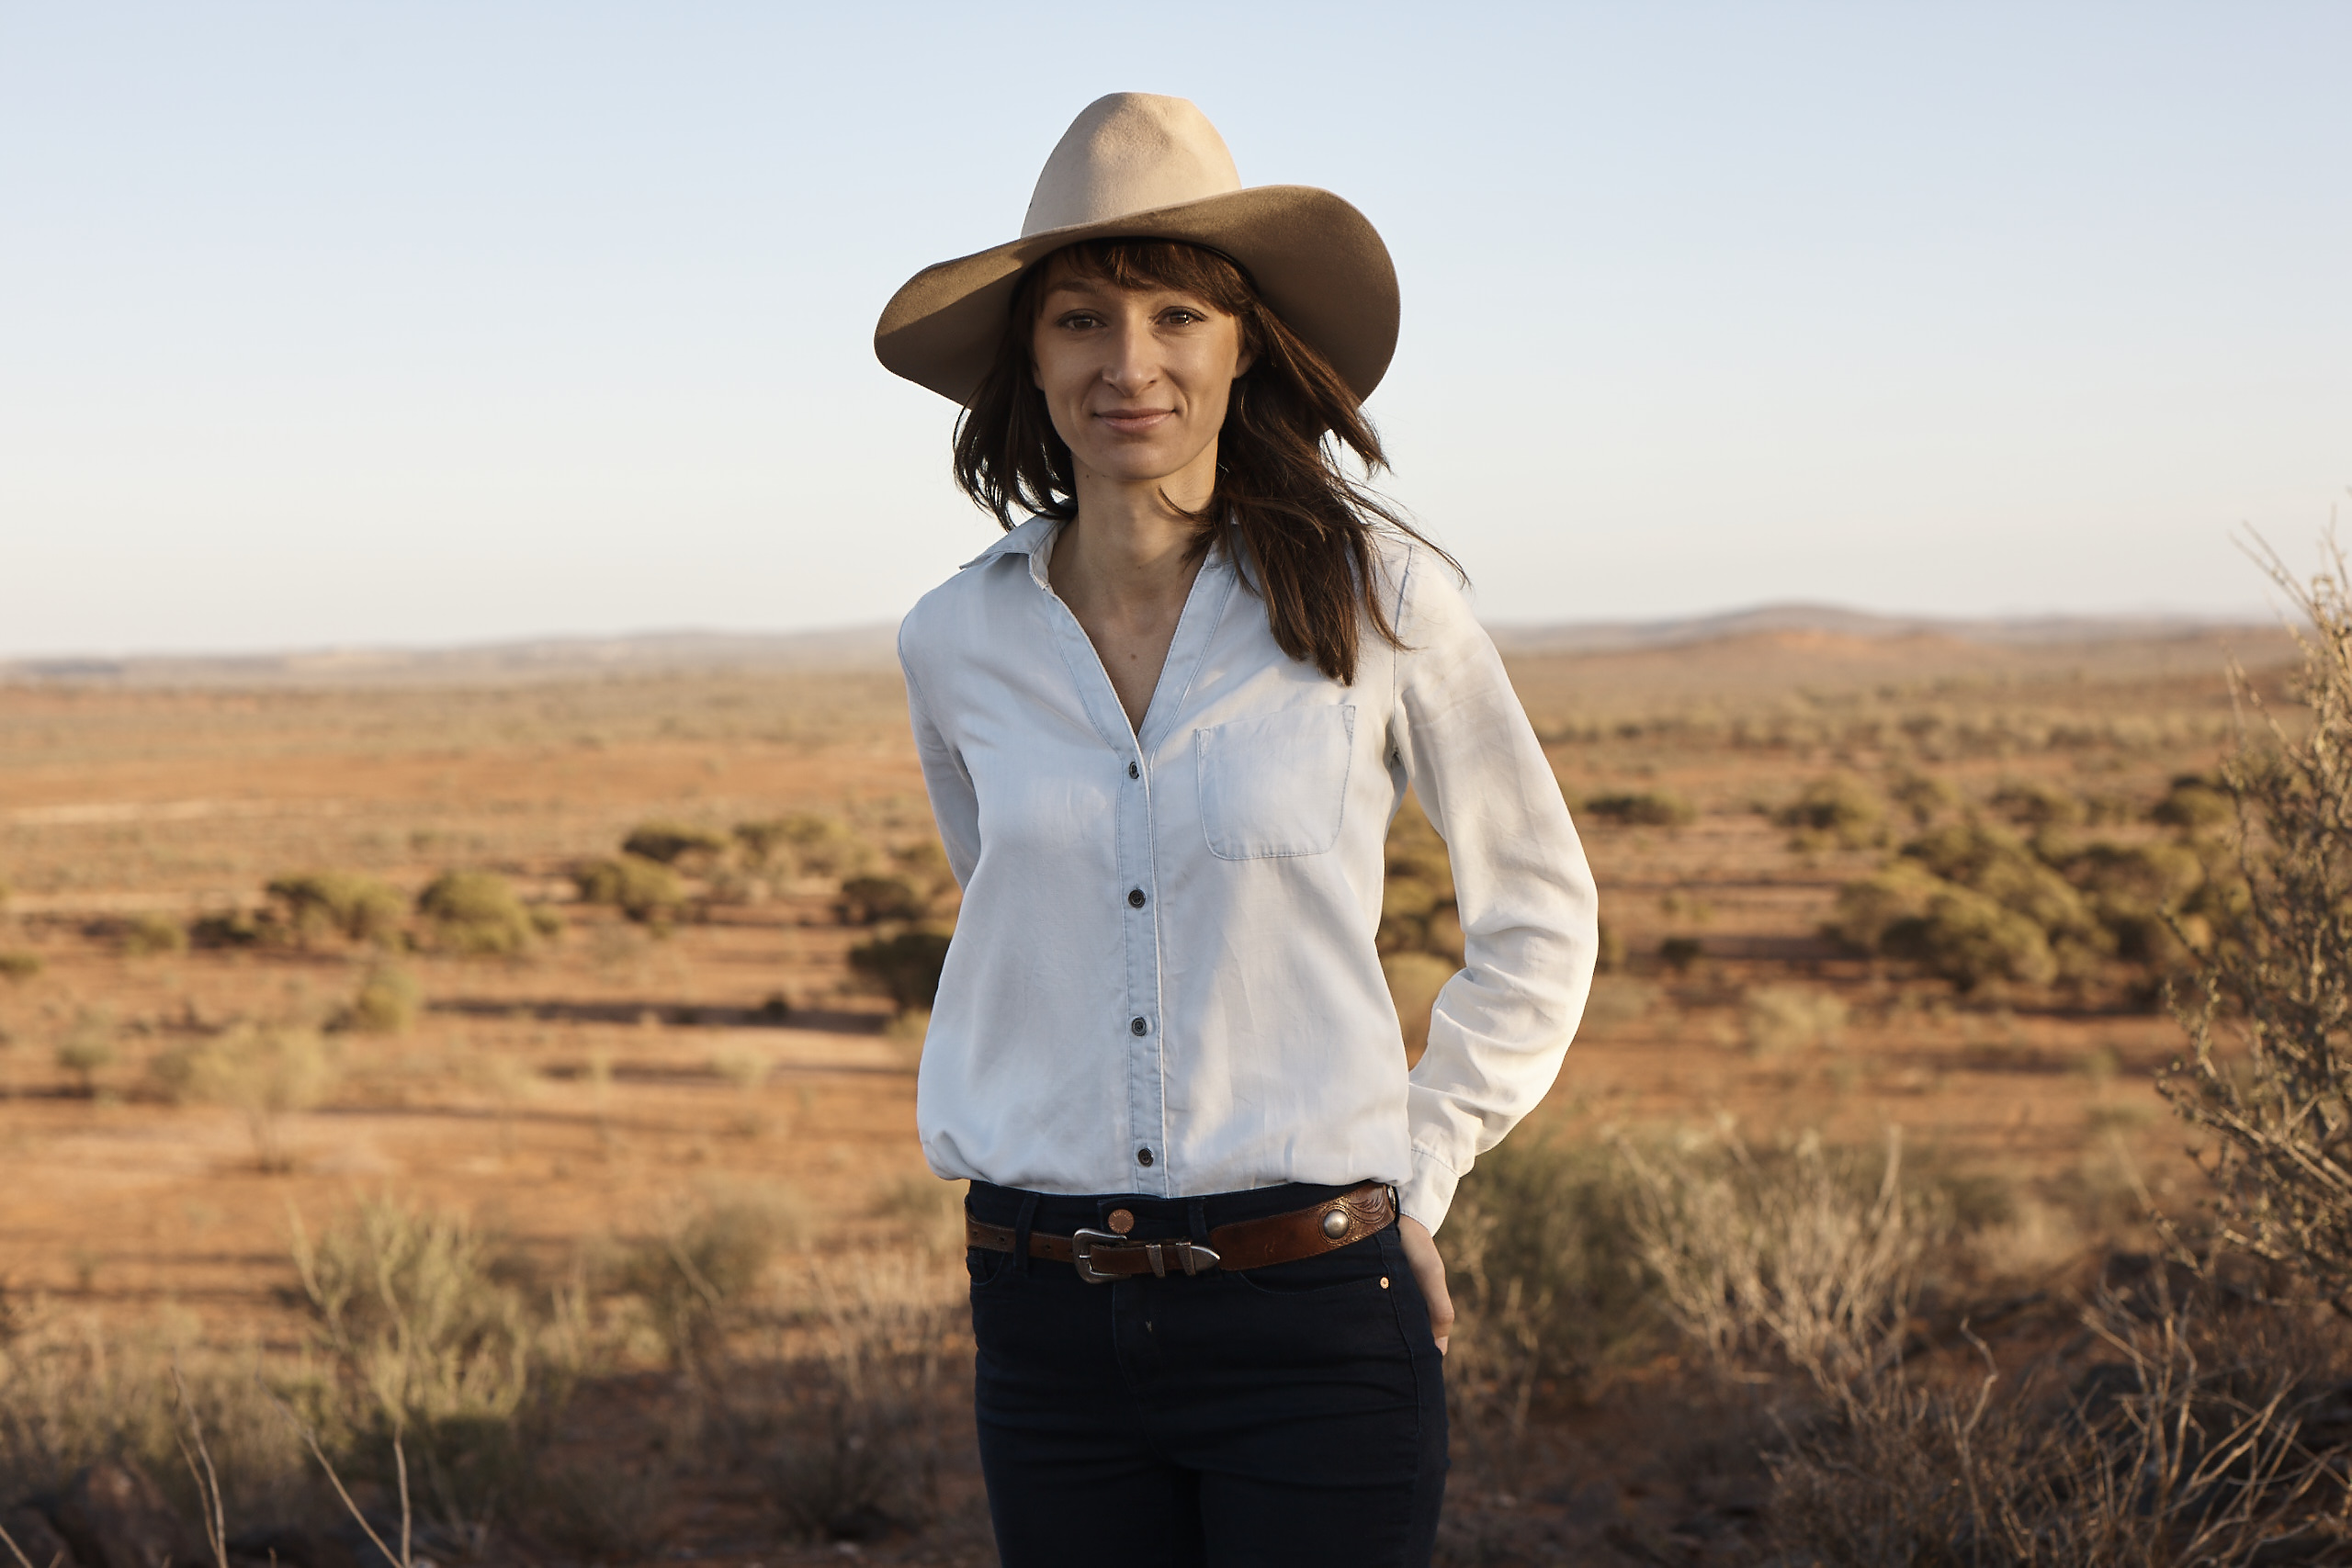 Australian Geographic Society Gala Awards 2022: Young Conservationist